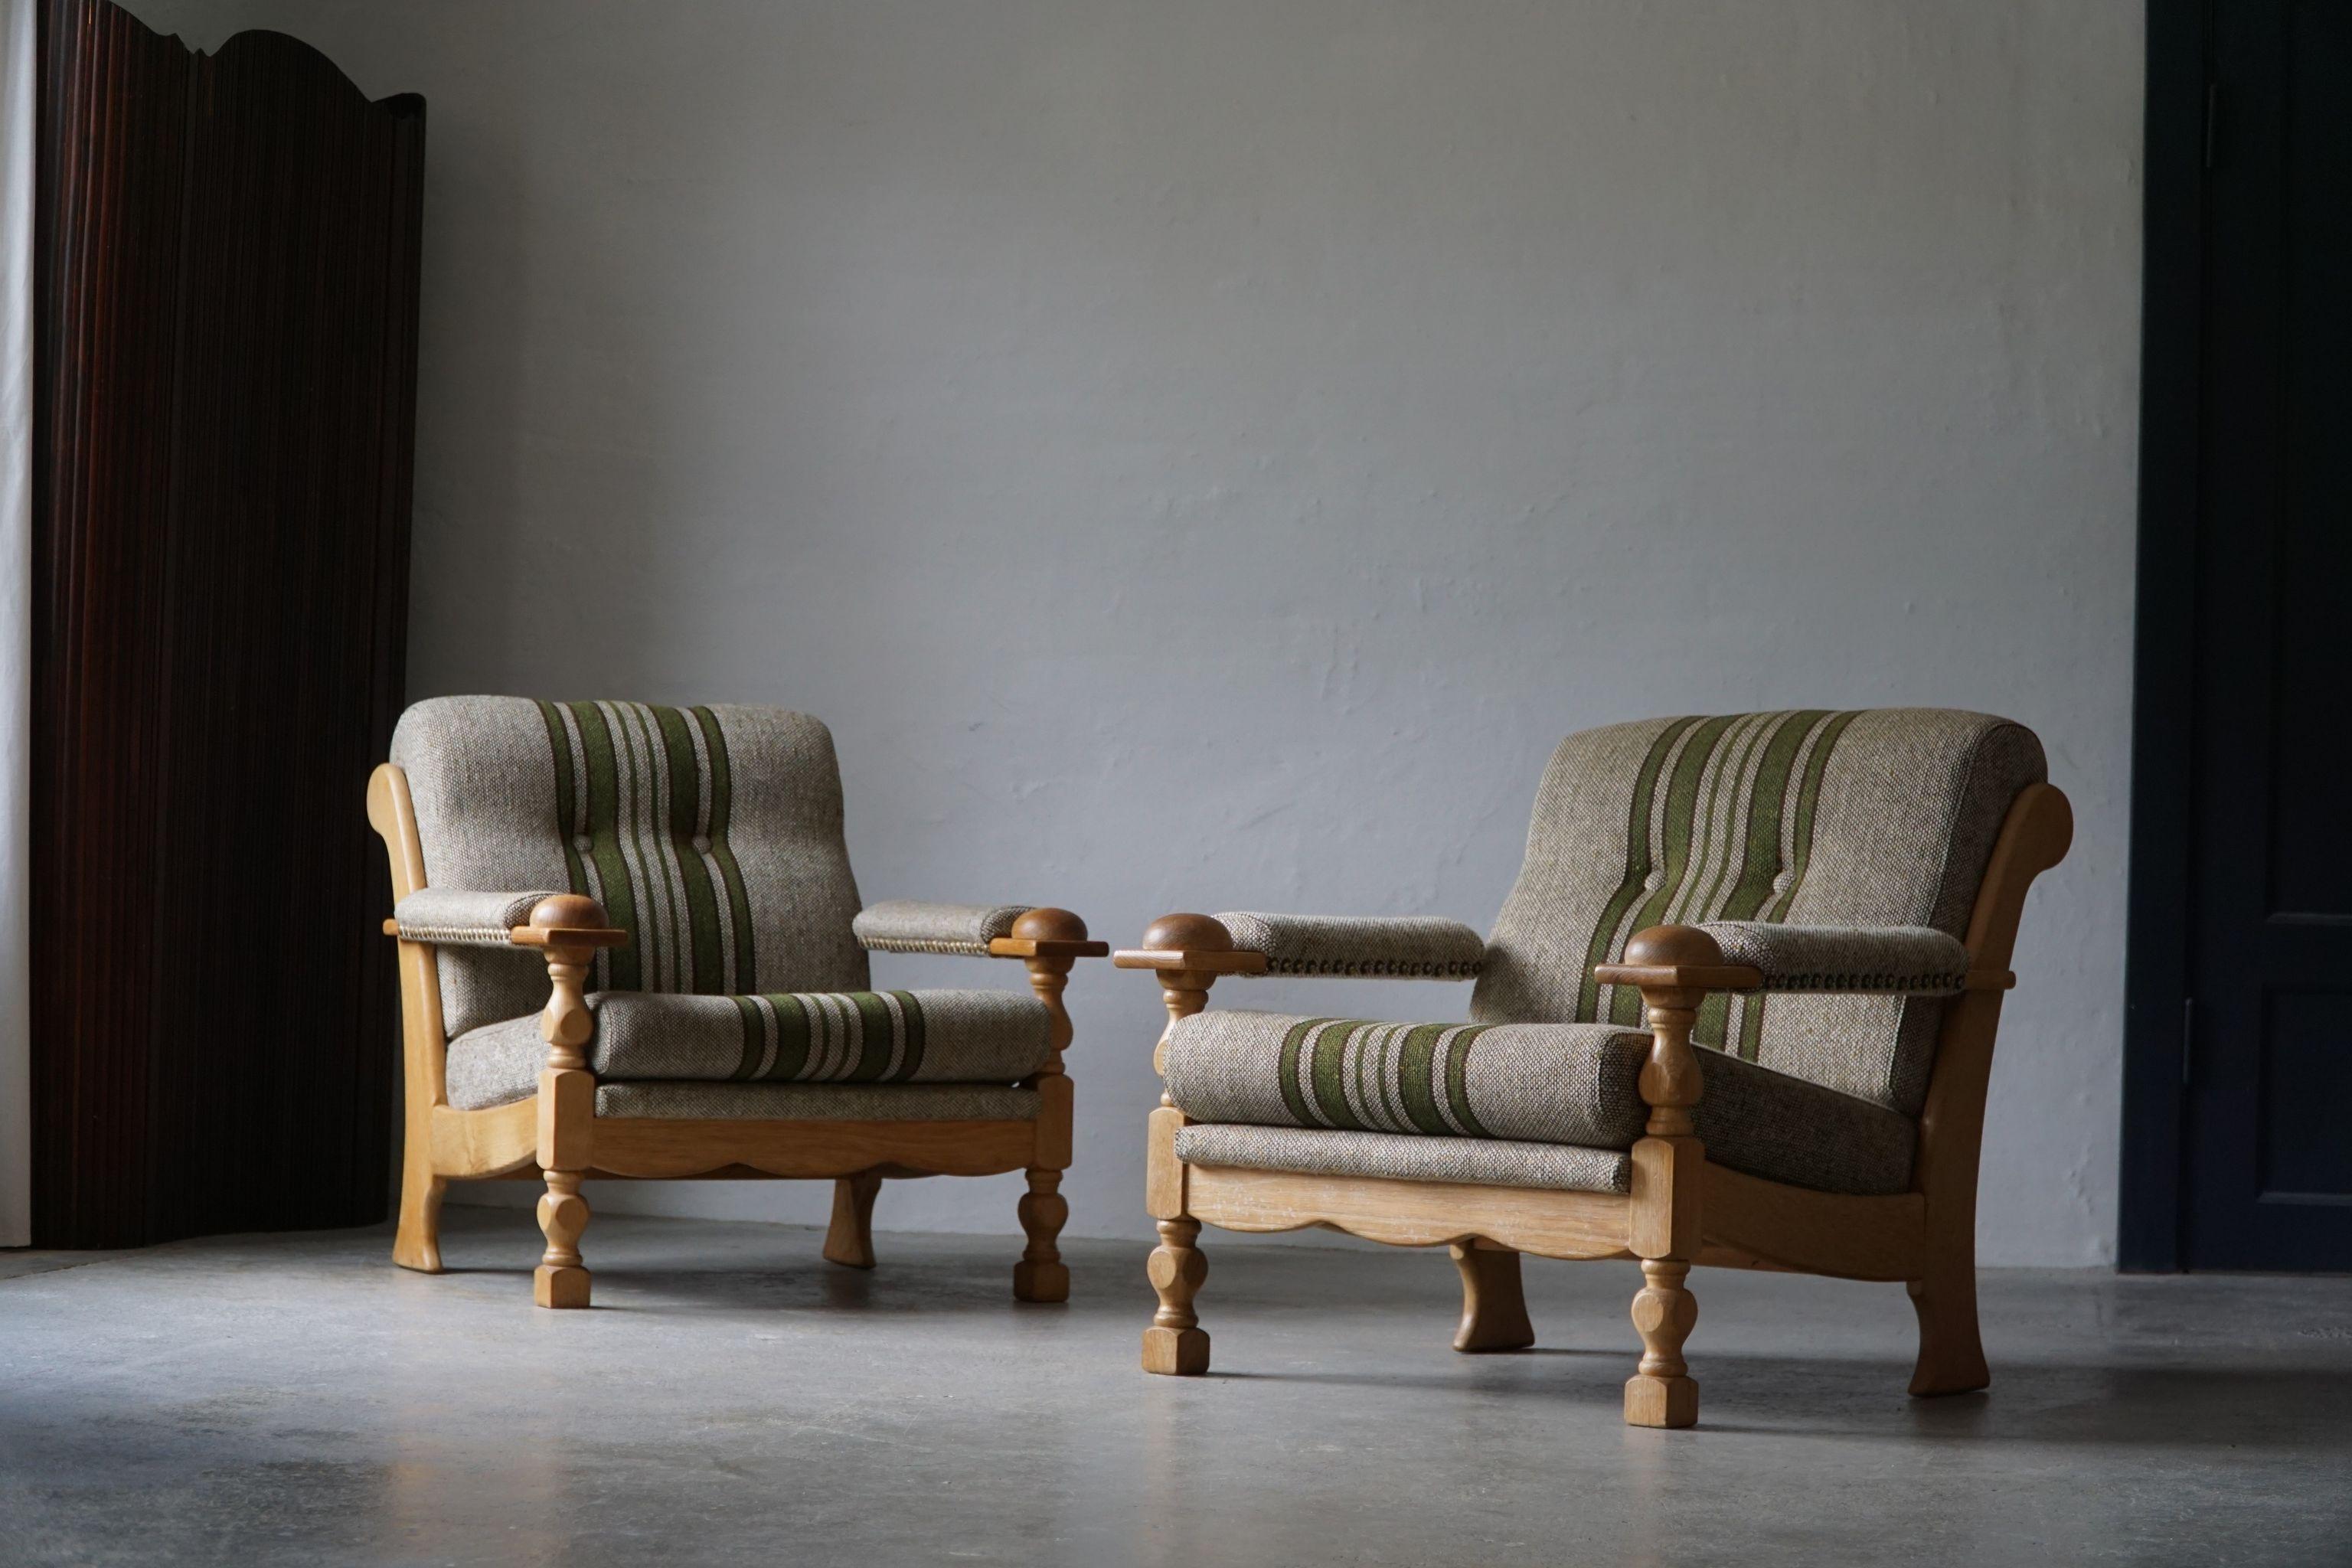 A sculptural pair of Danish Modern lounge chairs in style of Henning Kjærnulf. Made in oak and wool. Made in 1970s by a Danish Cabinetmaker.
The armchairs are in a good original vintage condition. Small marks on the fabric.

These nice vintage